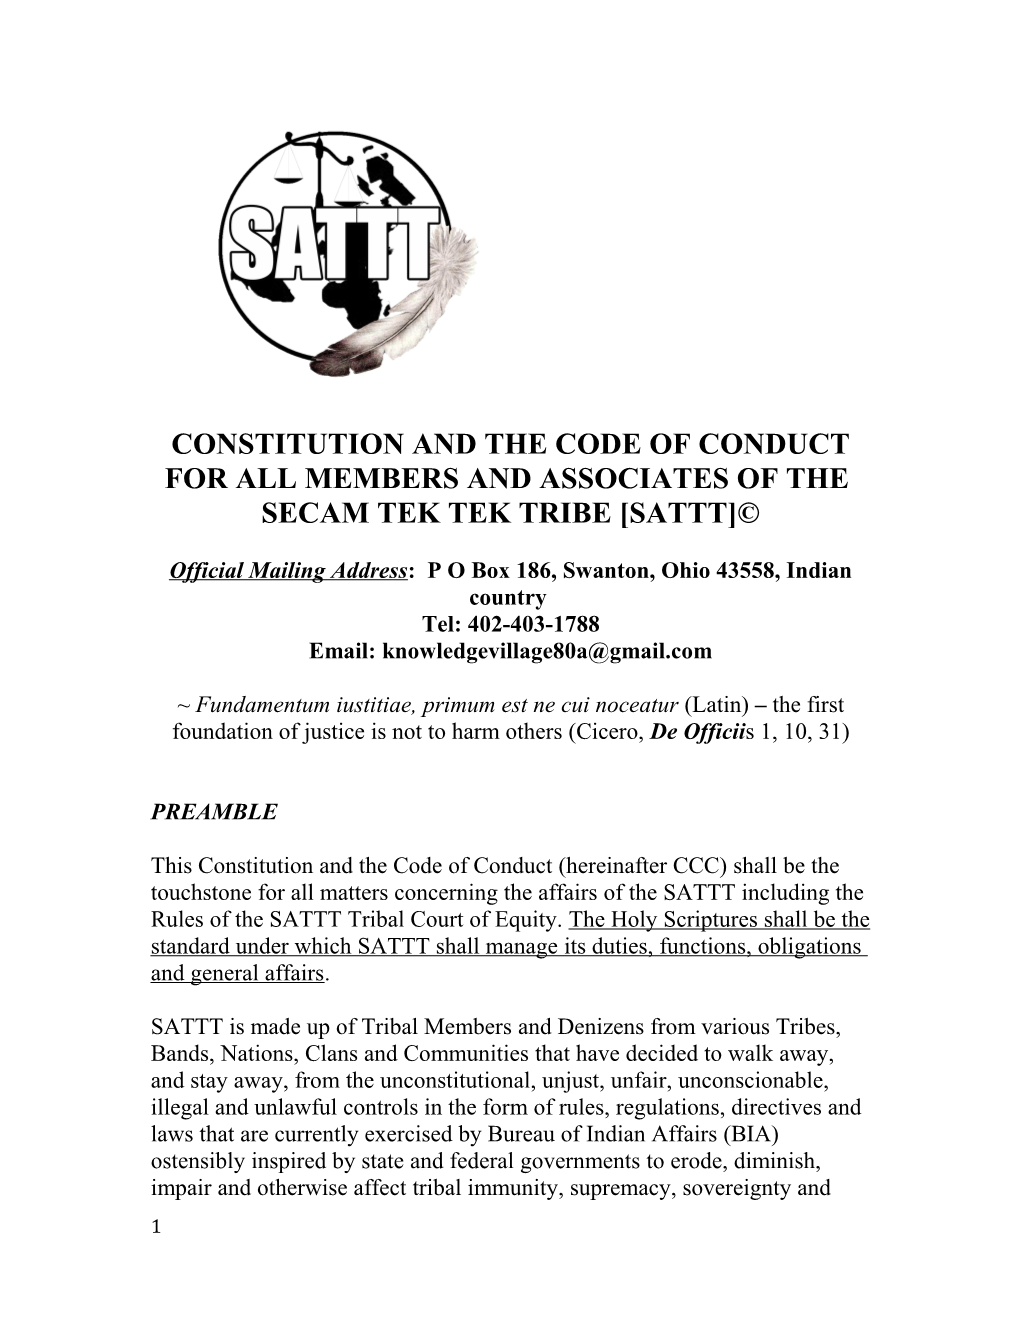 Constitution and the Code of Conduct for All Members and Associates of The